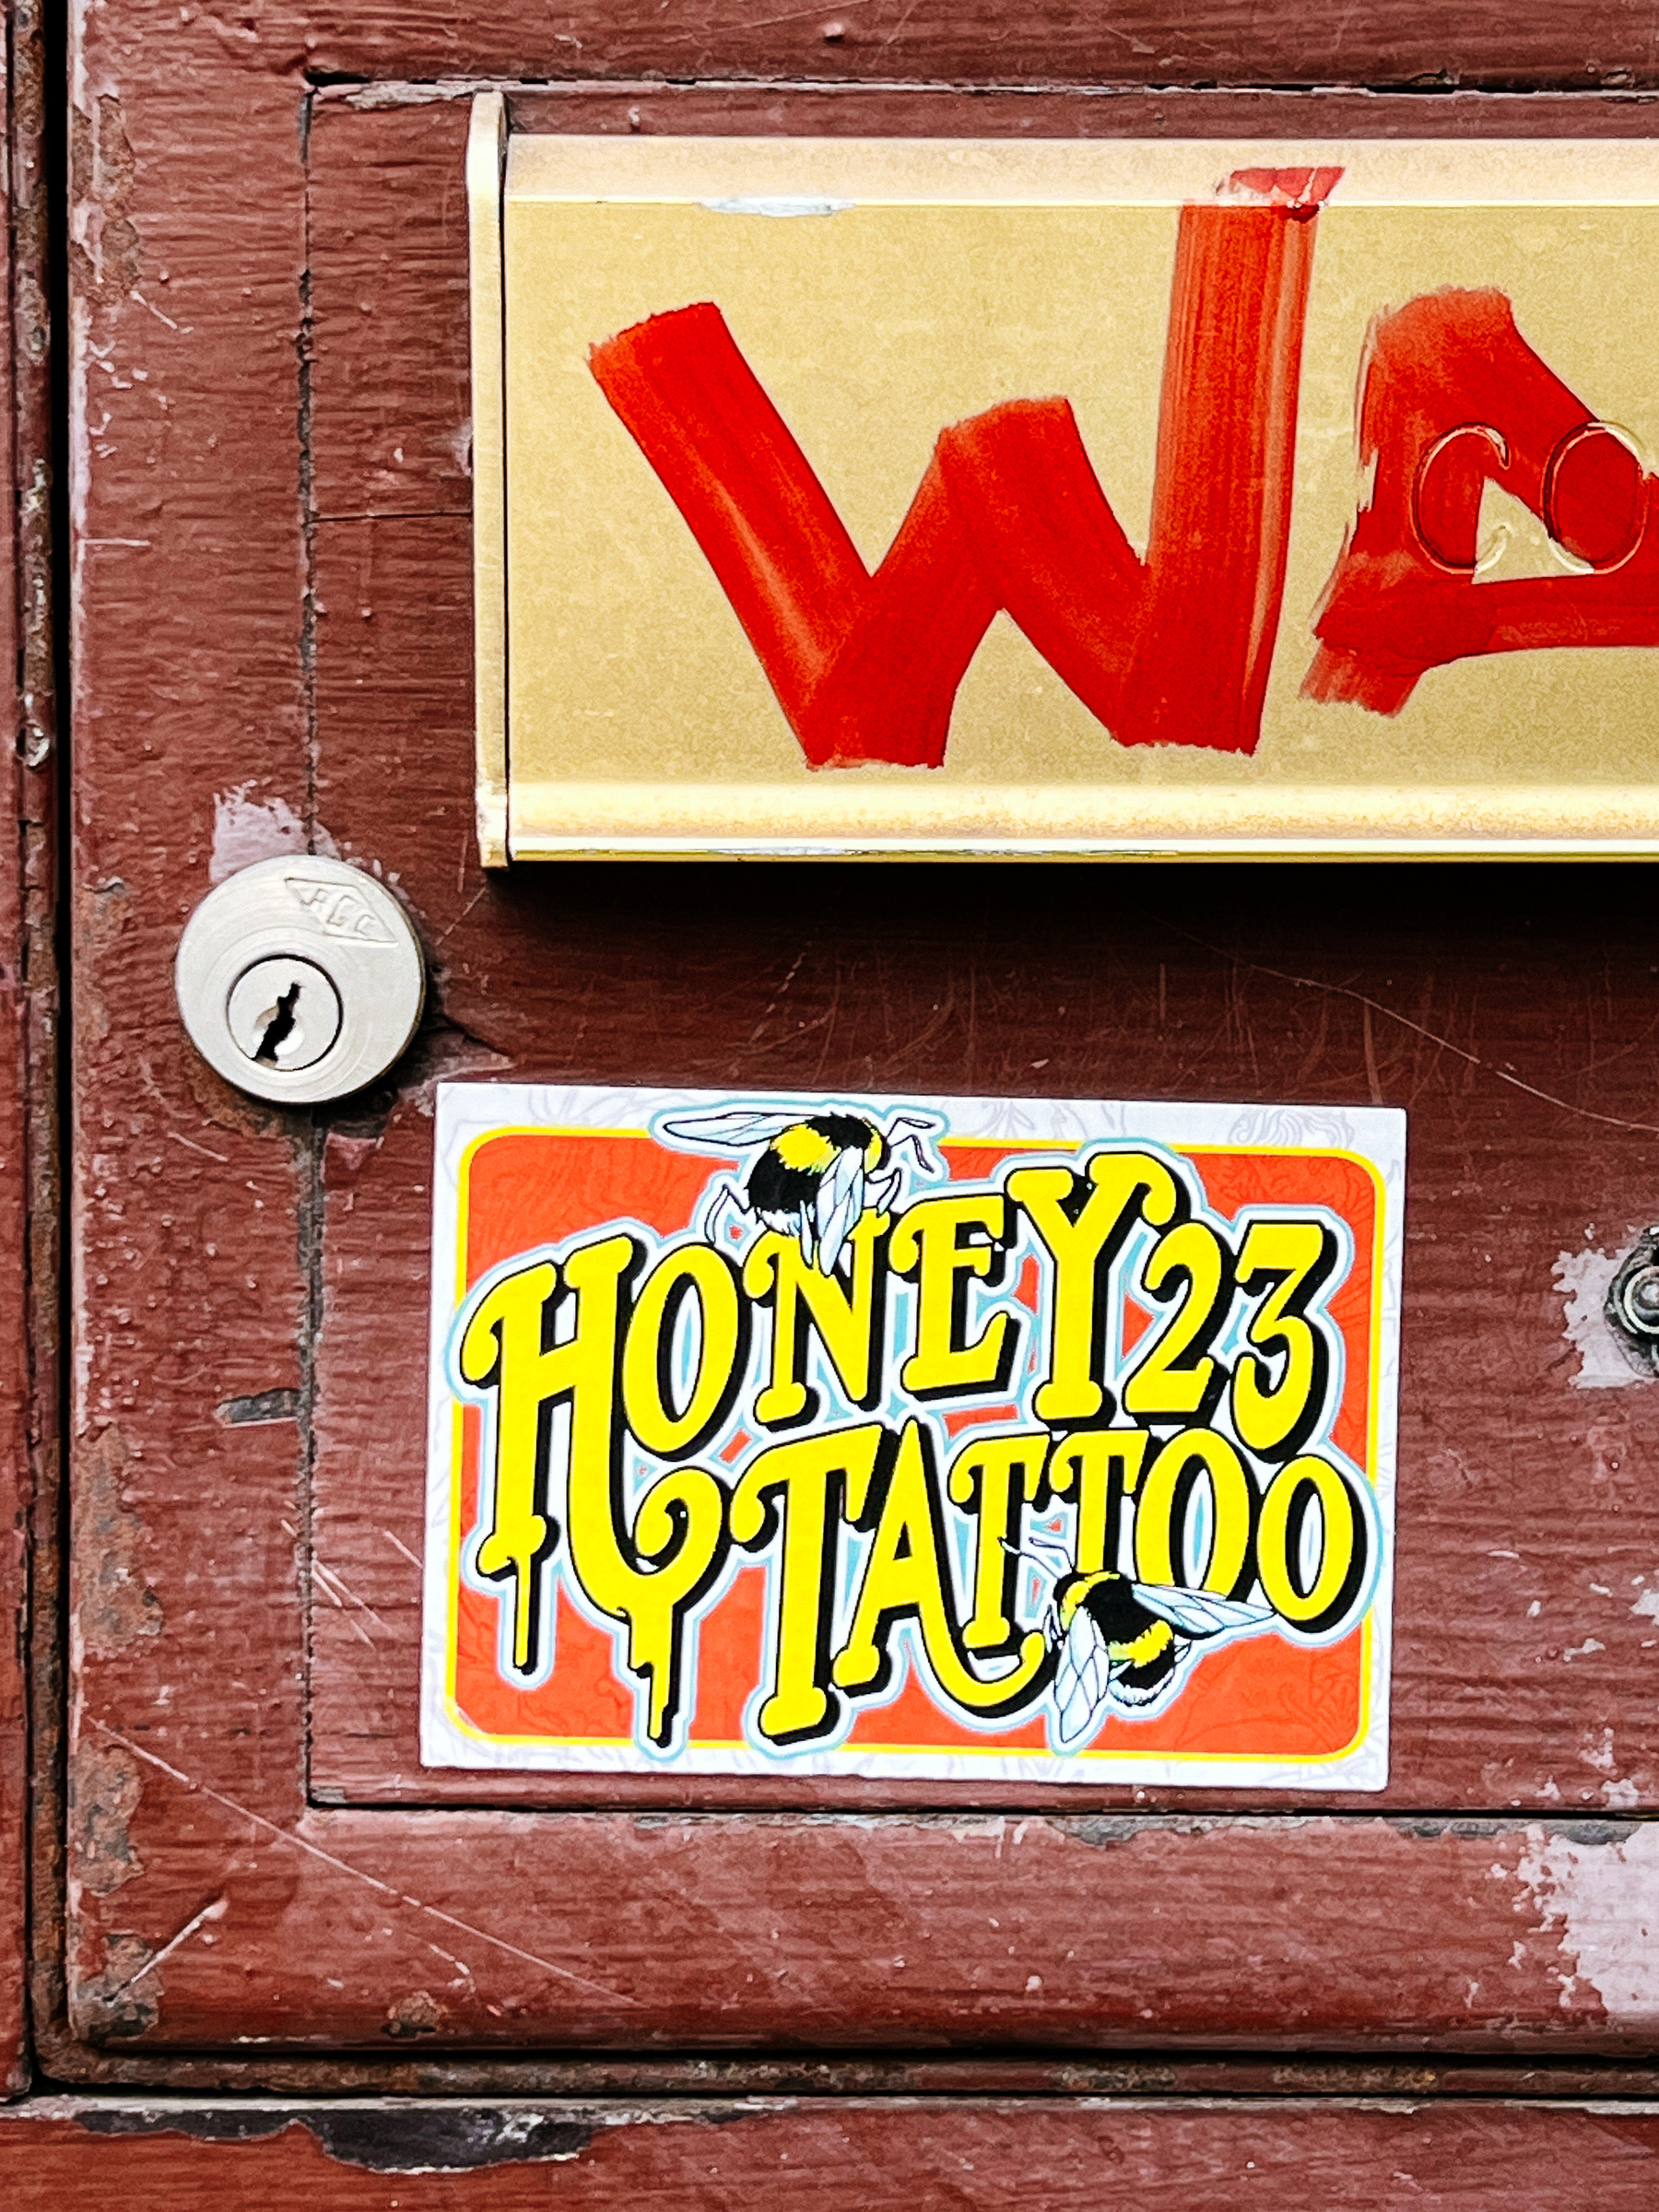 “Honey 23 Tattoo”, and a couple of bees. It’s a sticker. 